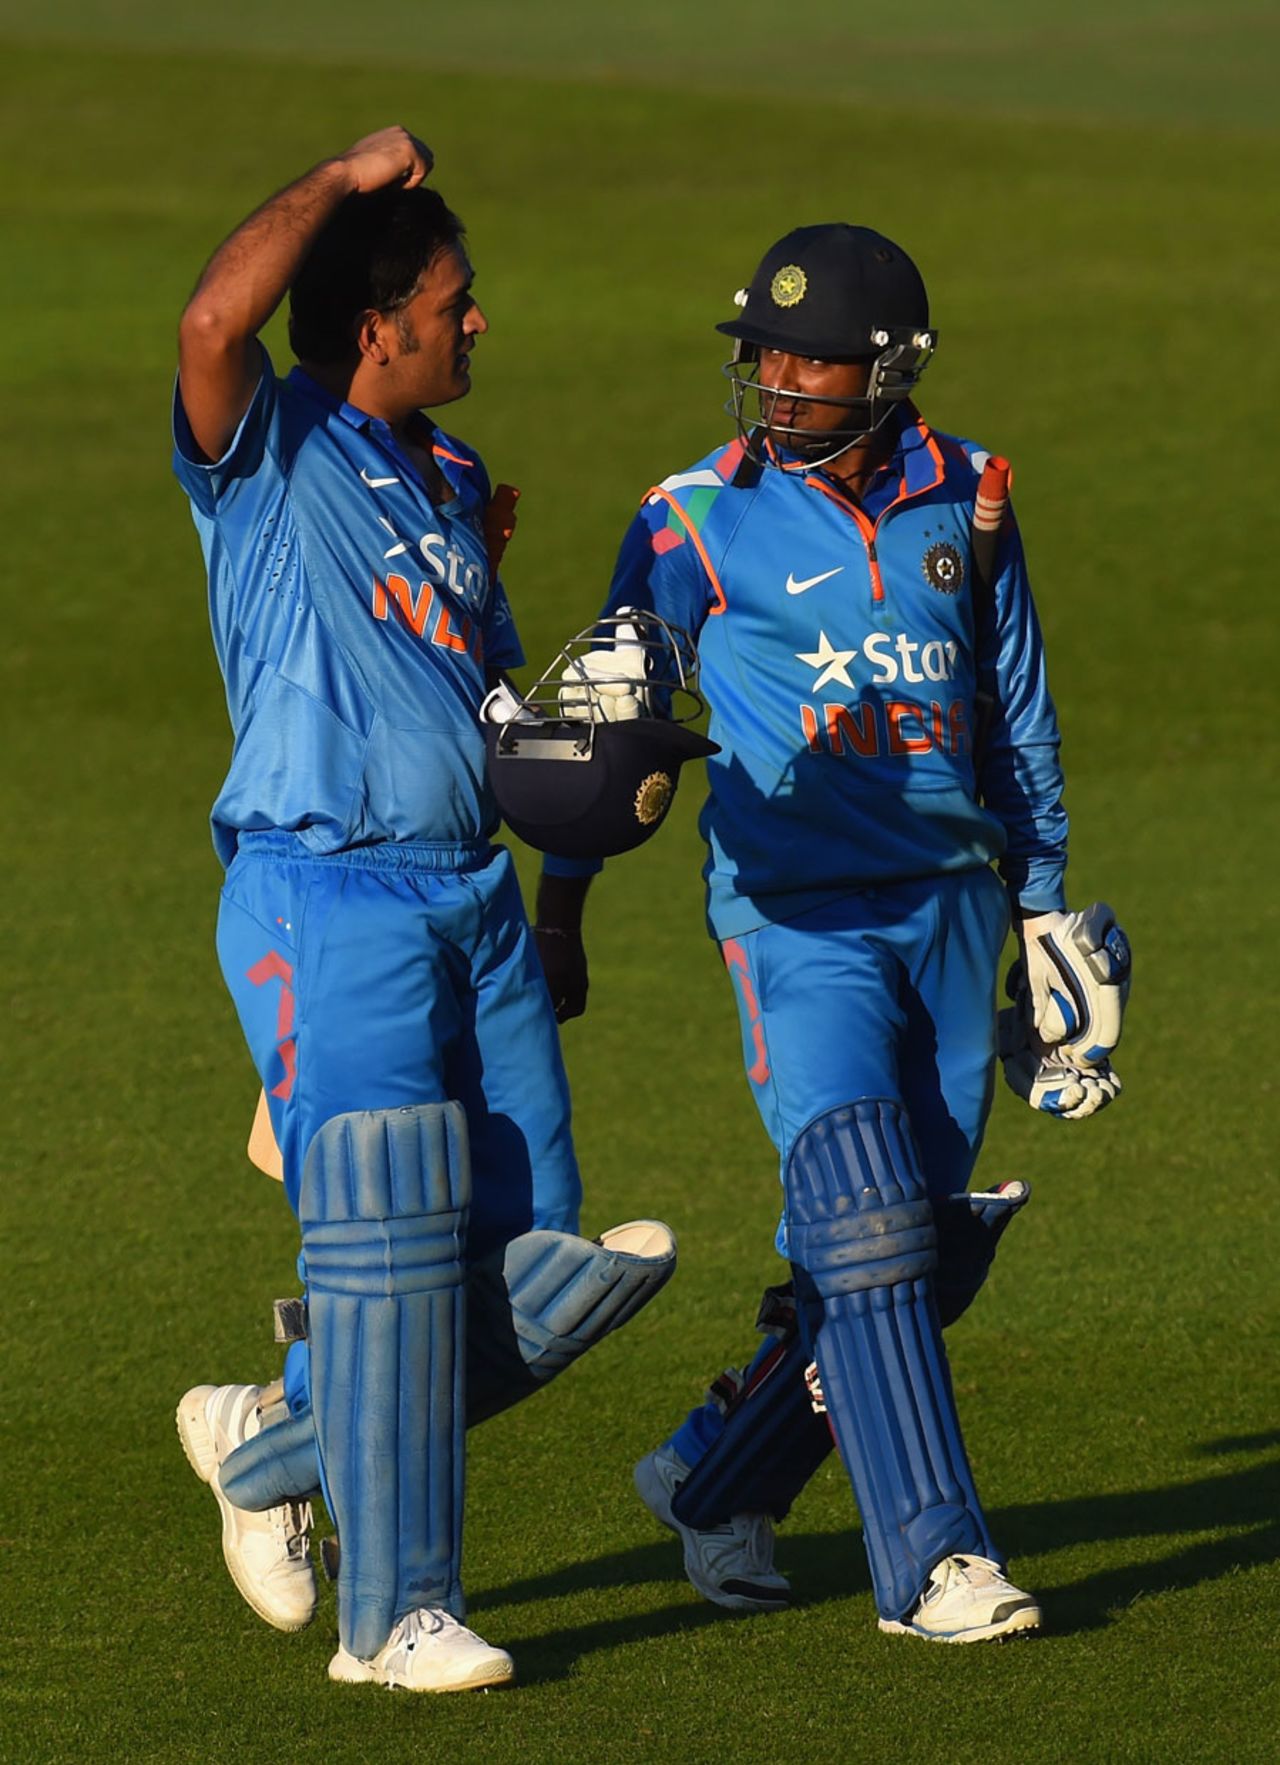 Where did we go wrong? MS Dhoni and Ambati Rayudu head off in defeat, England v India, only T20, Edgbaston, September 7, 2014